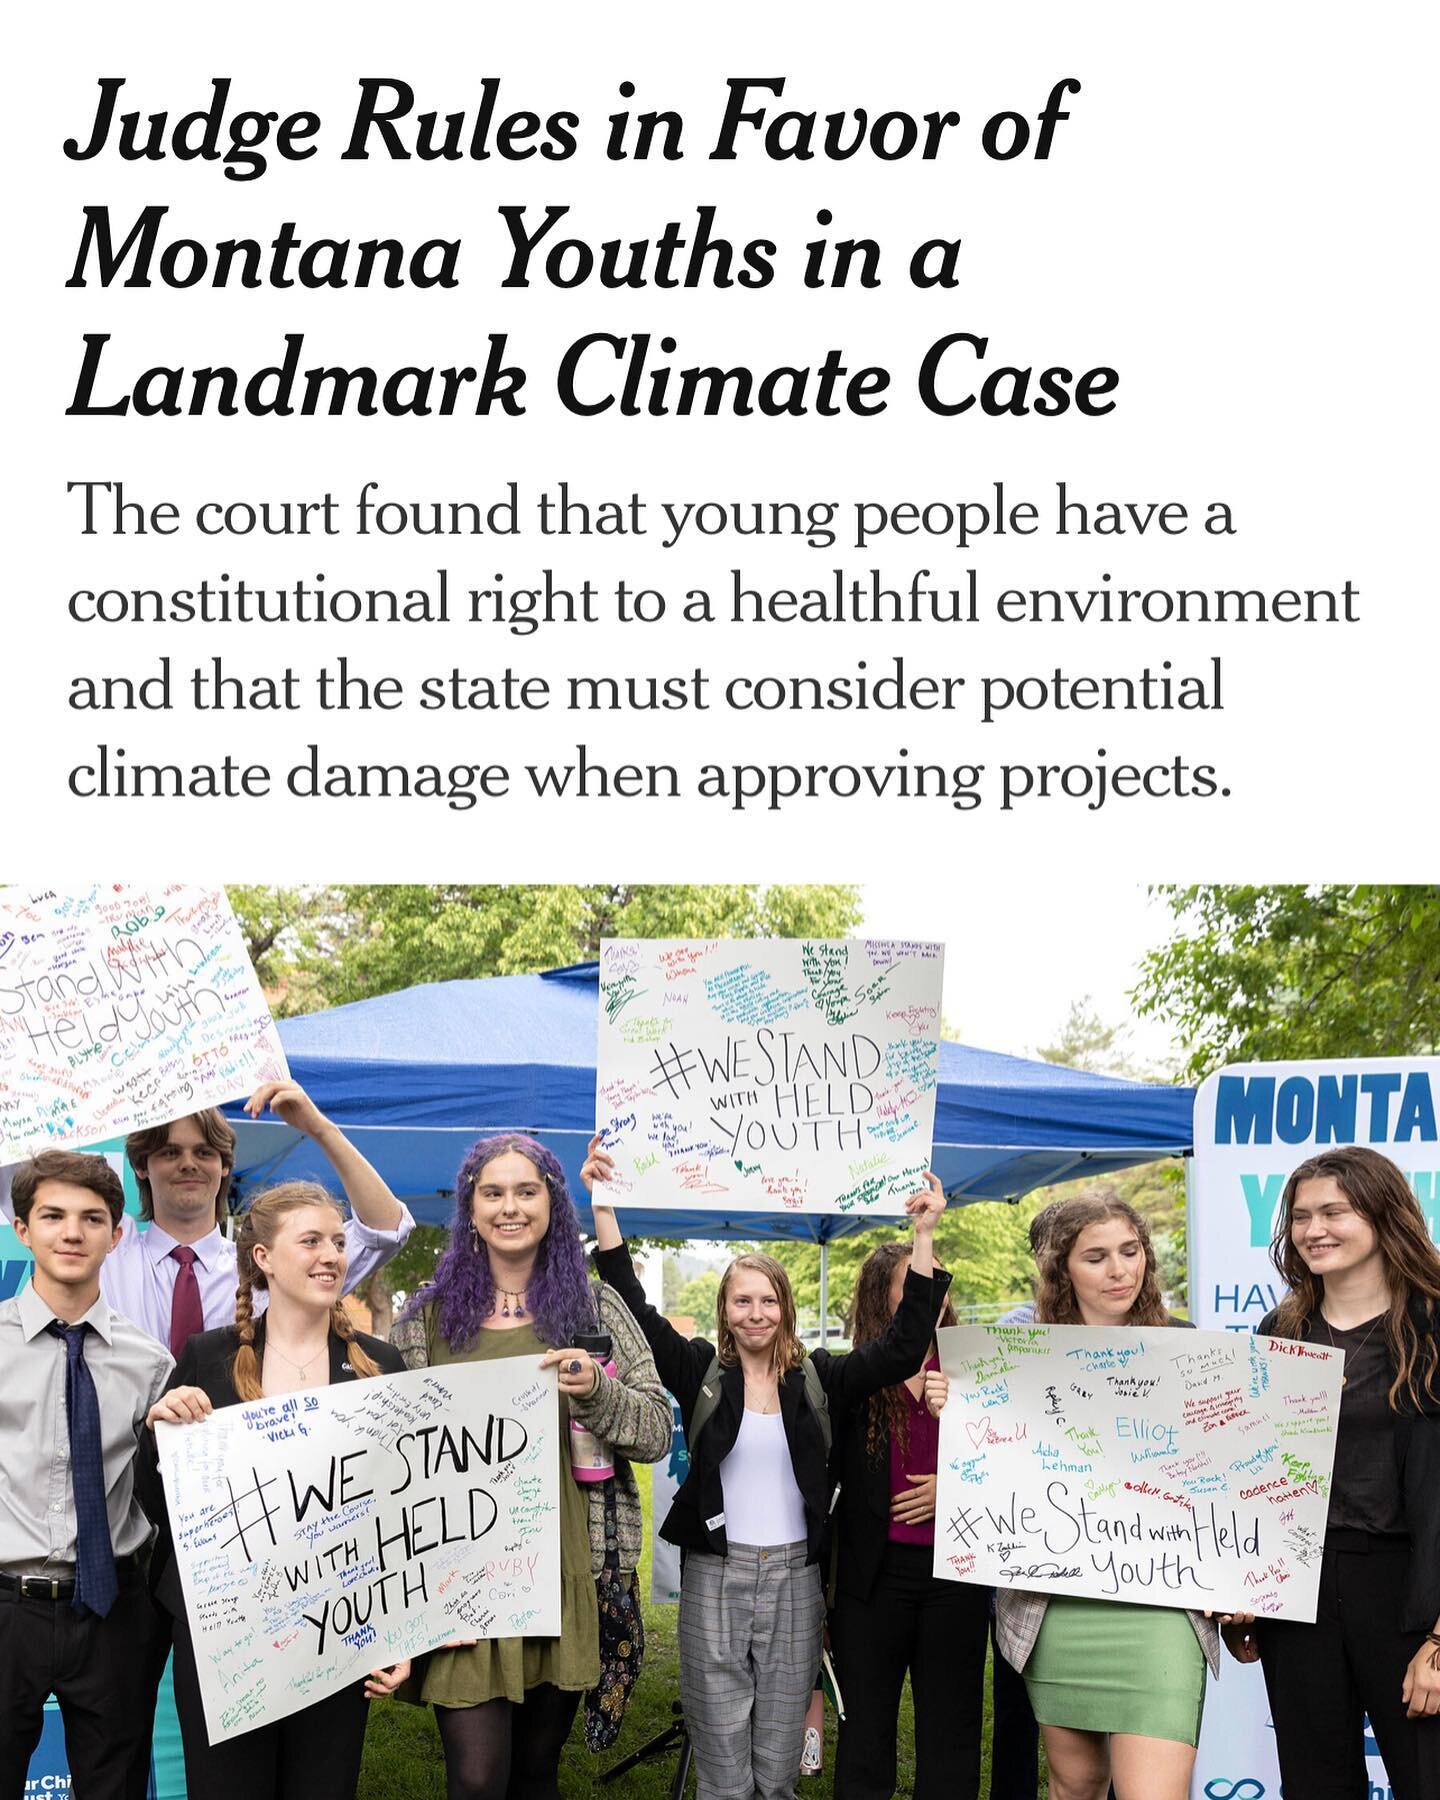 The world is harping on Trump&rsquo;s indictments while it just feeds his campaigns, but meanwhile&hellip; This. This is big. Huge. 
#youthledclimateaction 
#tochangeeverythingweneedeveryone 
#yesthatwasaprettywomanreference